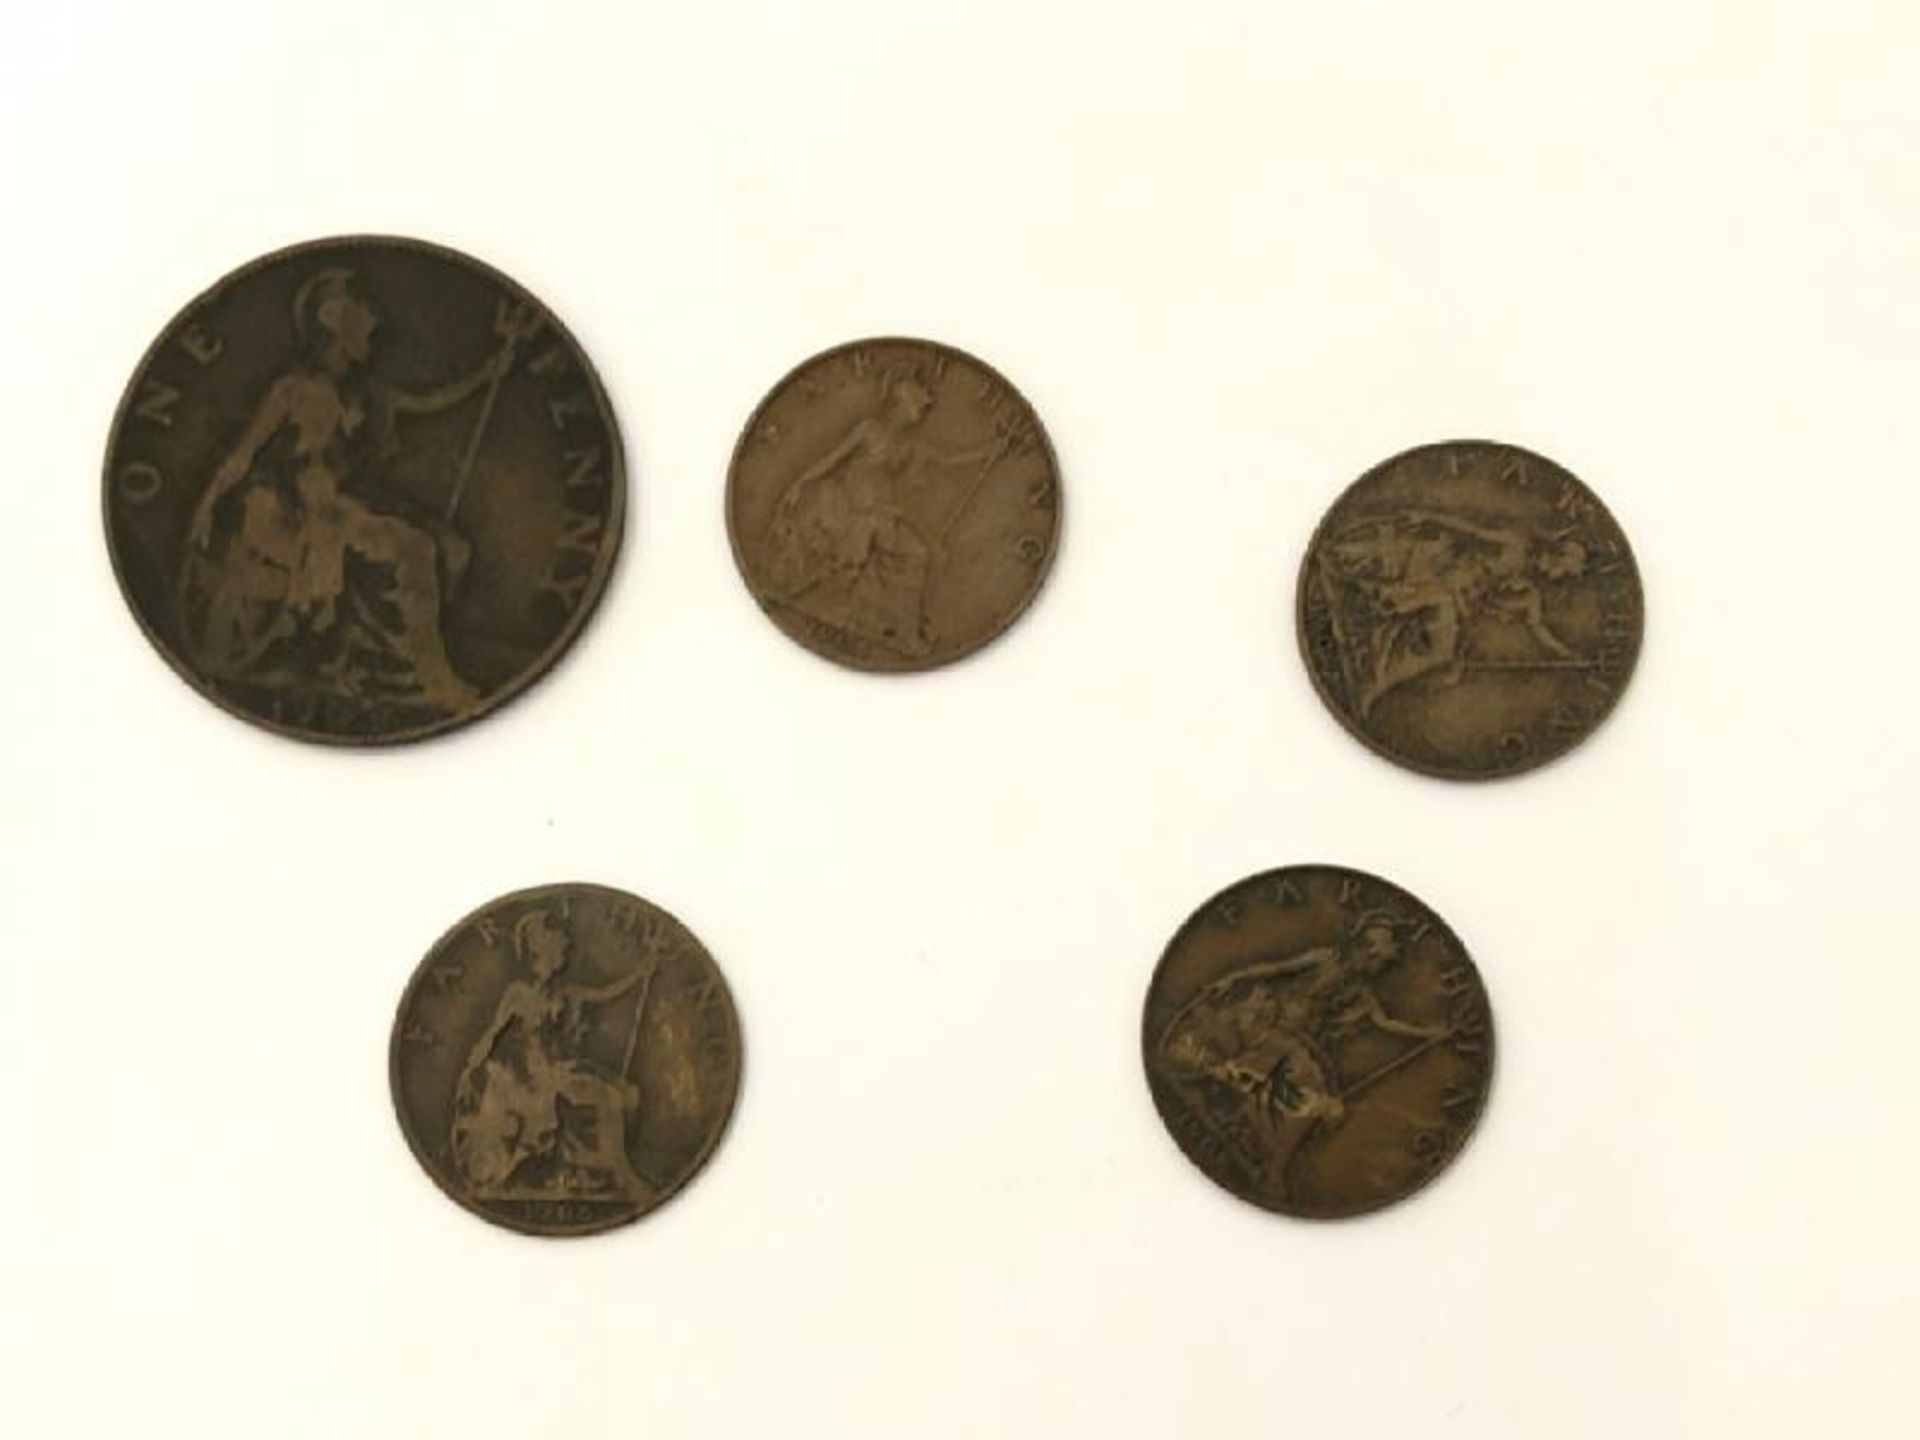 Five Queen Victoria coins dated 1840, 1879, 1862, 1898 and 1900 with five Edward VII coins / AN9 - Image 5 of 7